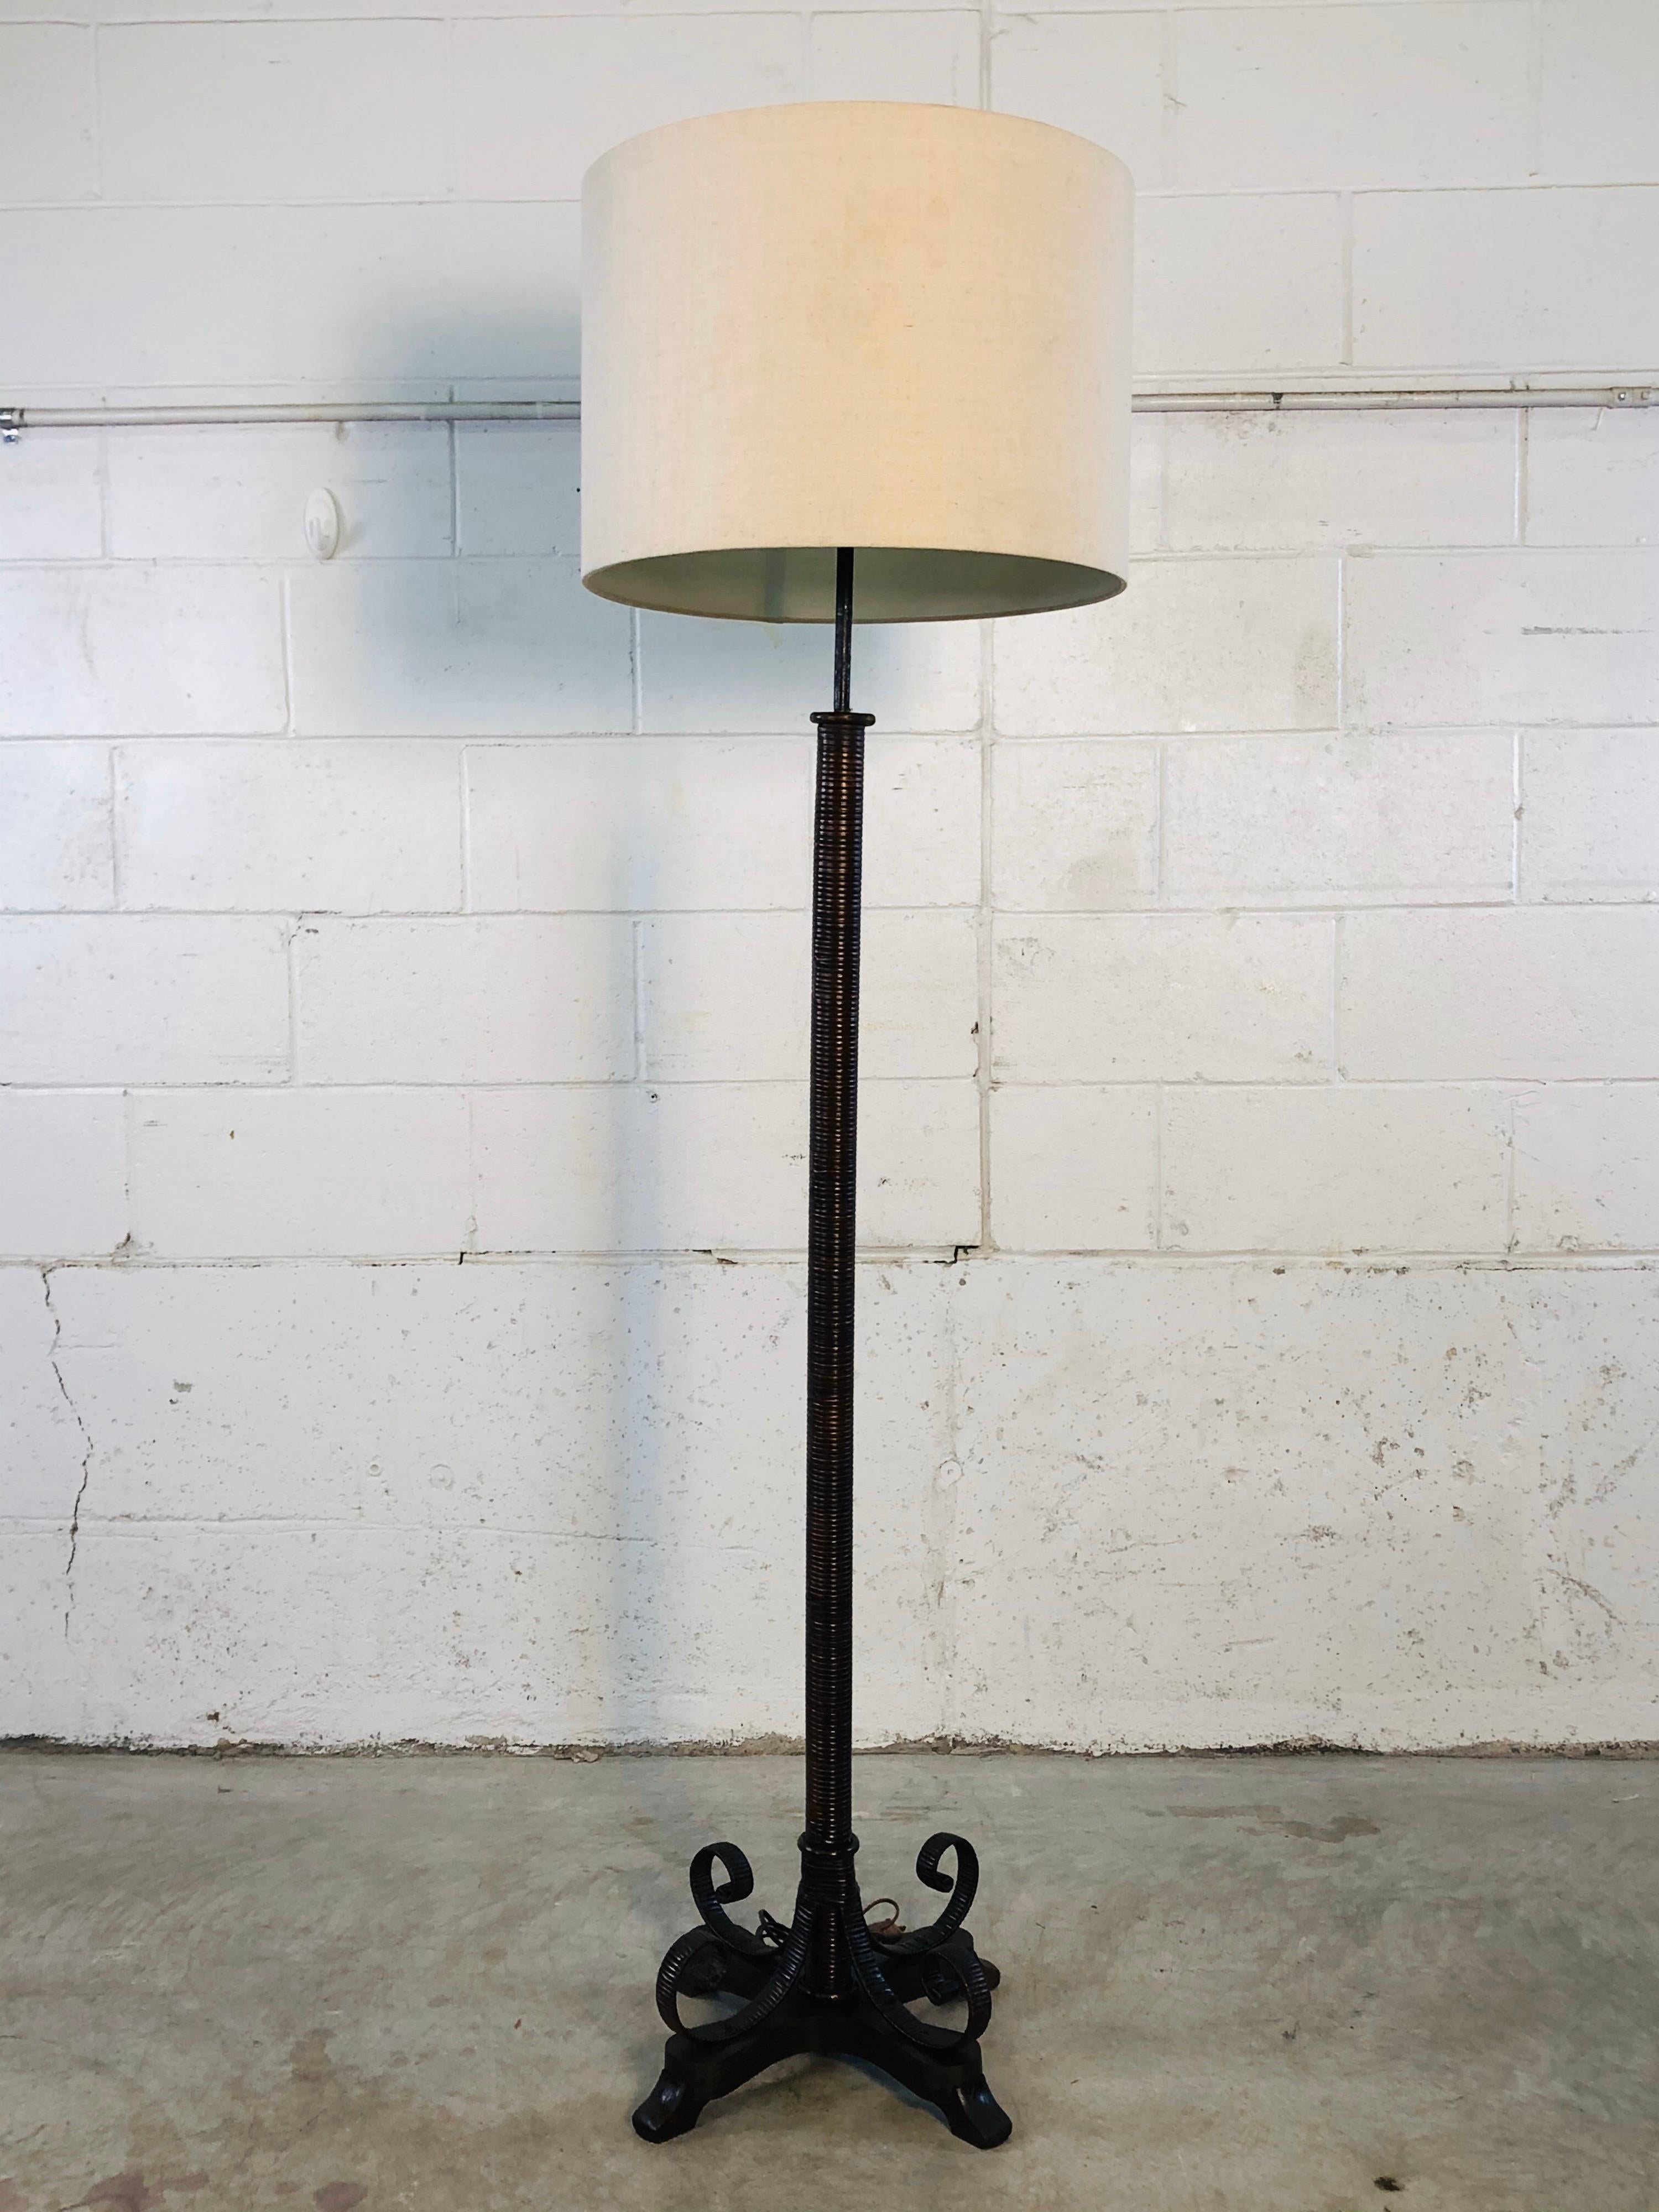 Vintage 1920s Heywood-Wakefield Rattan wrapped floor lamp from the Chicago showroom. This rare lamp is wired for the US and in working condition. The entire base is wrapped in rattan and has a wood base. Comes with a partial label. Shade is not